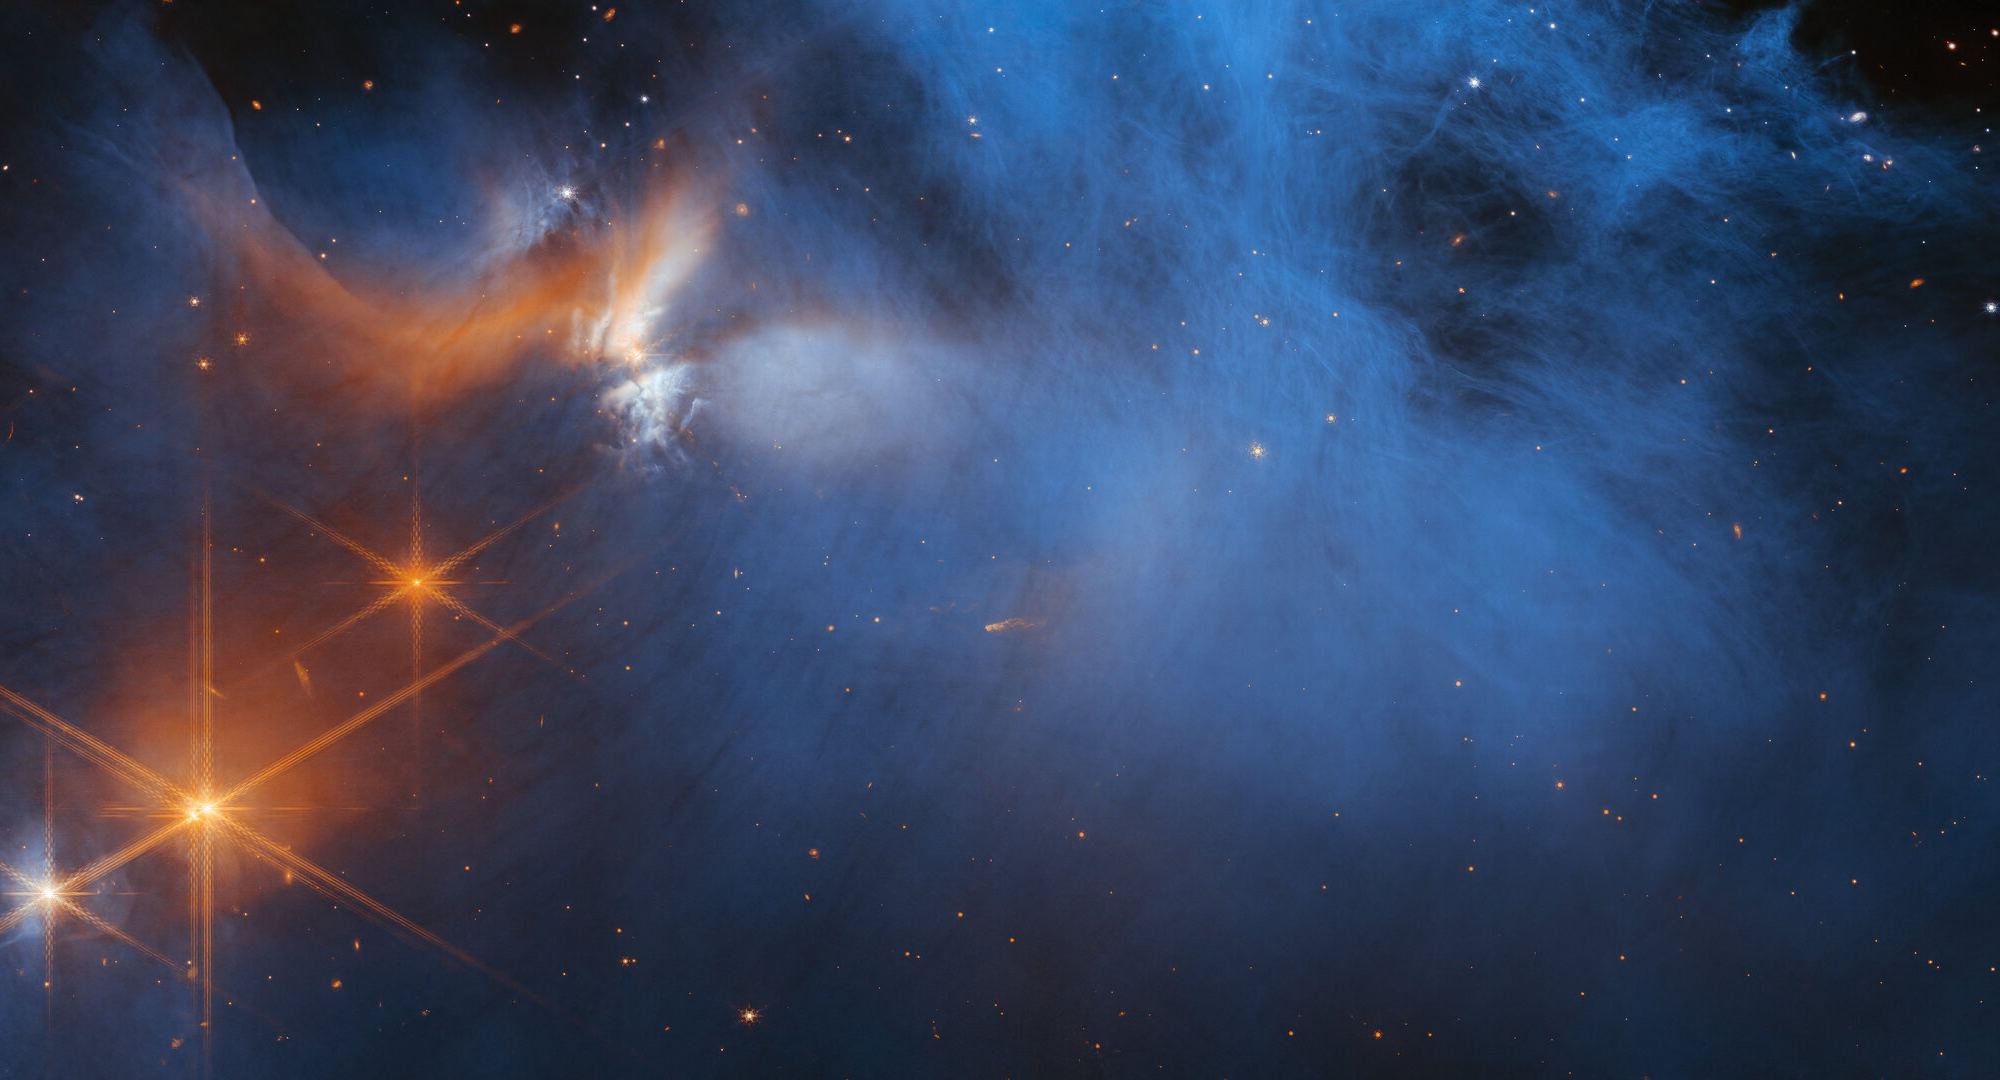 A large, dark cloud is contained within the frame. In its top half it is textured like smoke and has wispy gaps, while at the bottom and at the sides it fades gradually out of view. On the left are several orange stars: three each with six large spikes, and one behind the cloud which colours it pale blue and orange. Many tiny stars are visible, and the background is black.